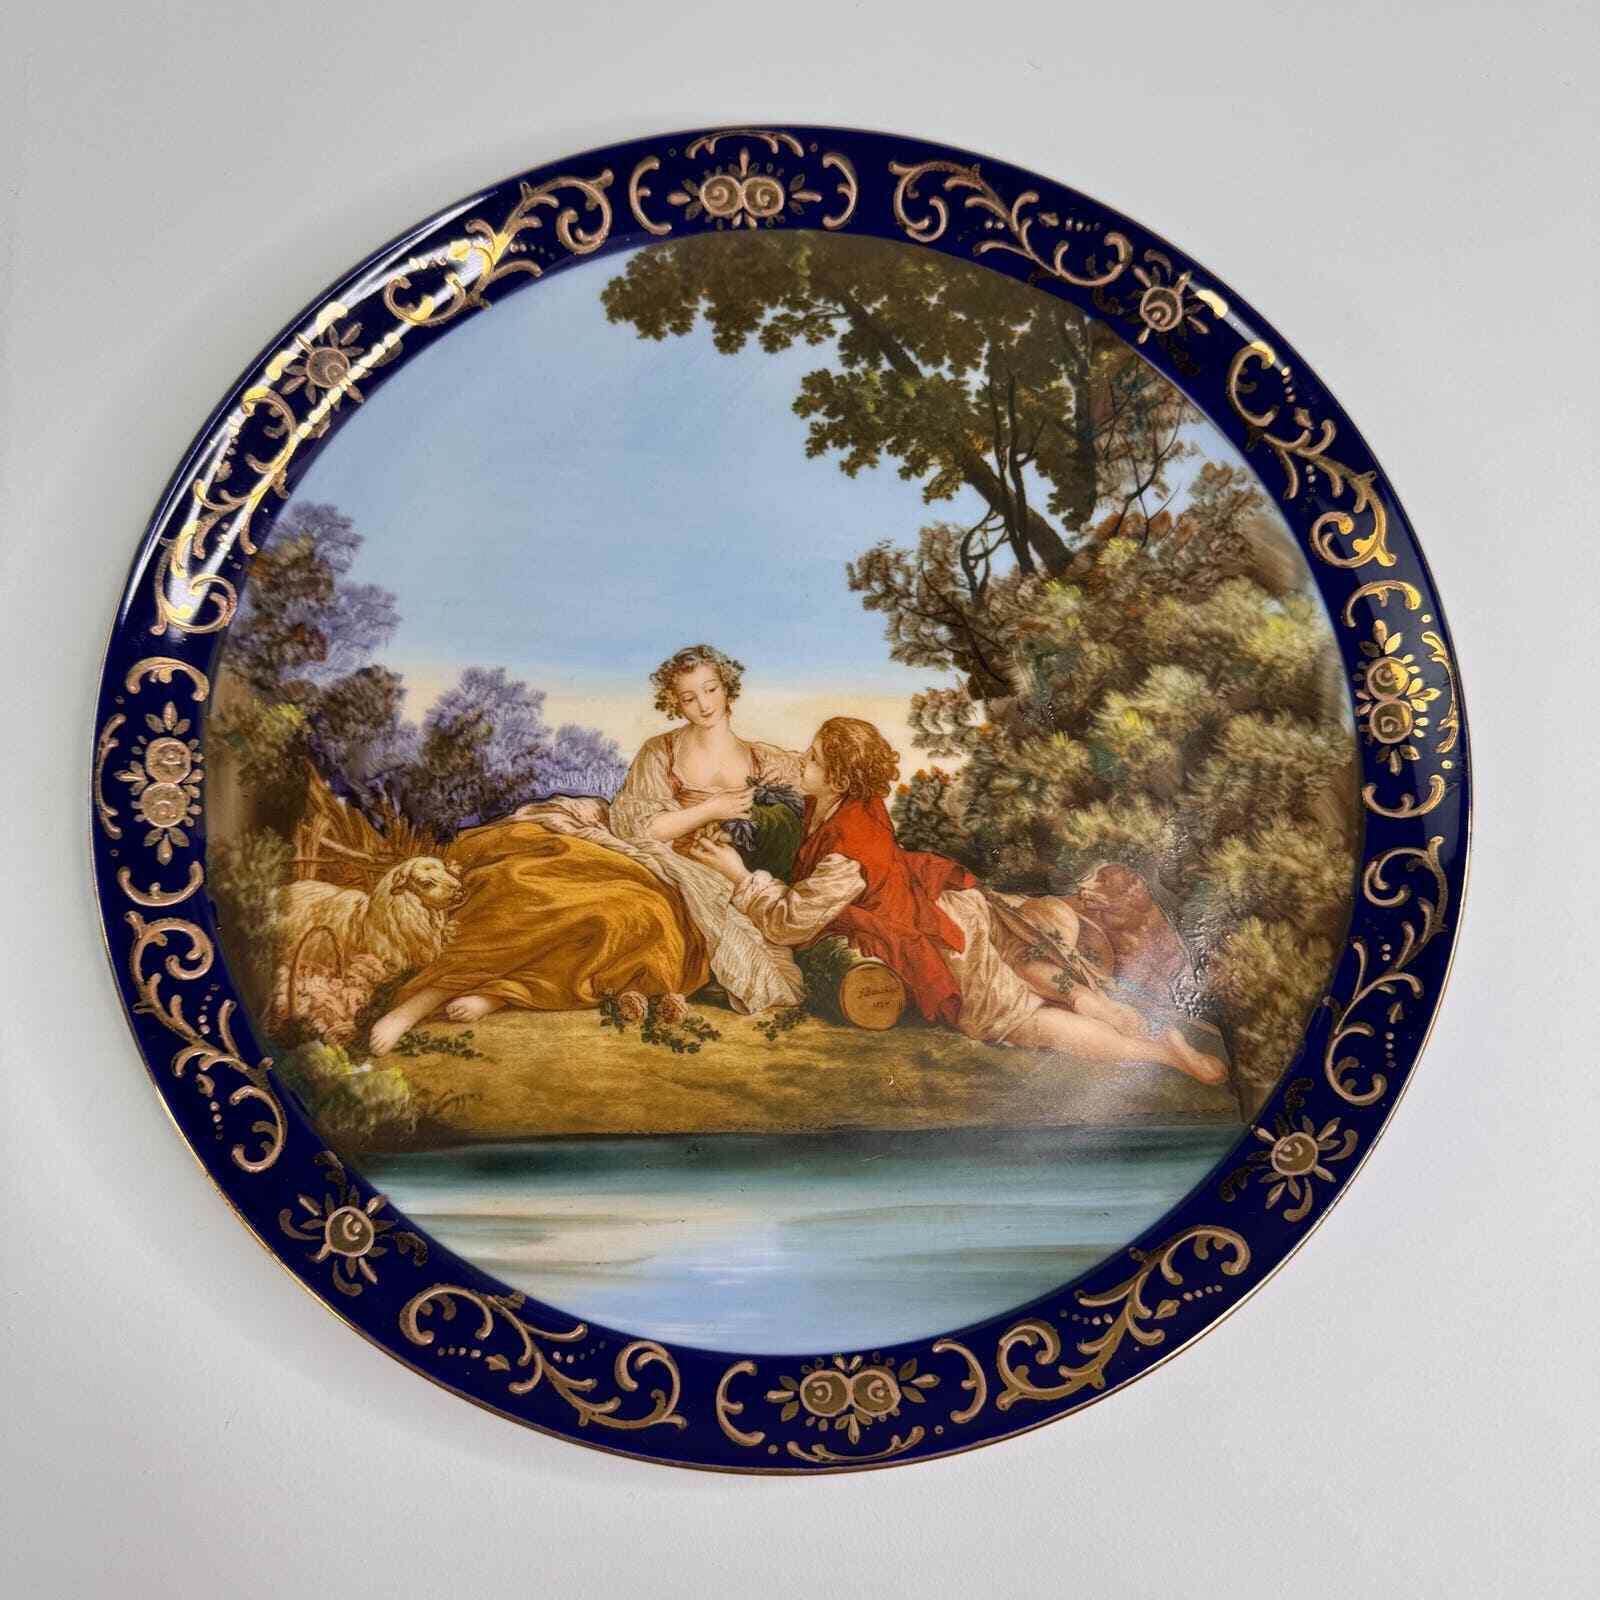 Antique Cabinet Plate Courting Couple Pastoral Scene Porcelain French Decor 